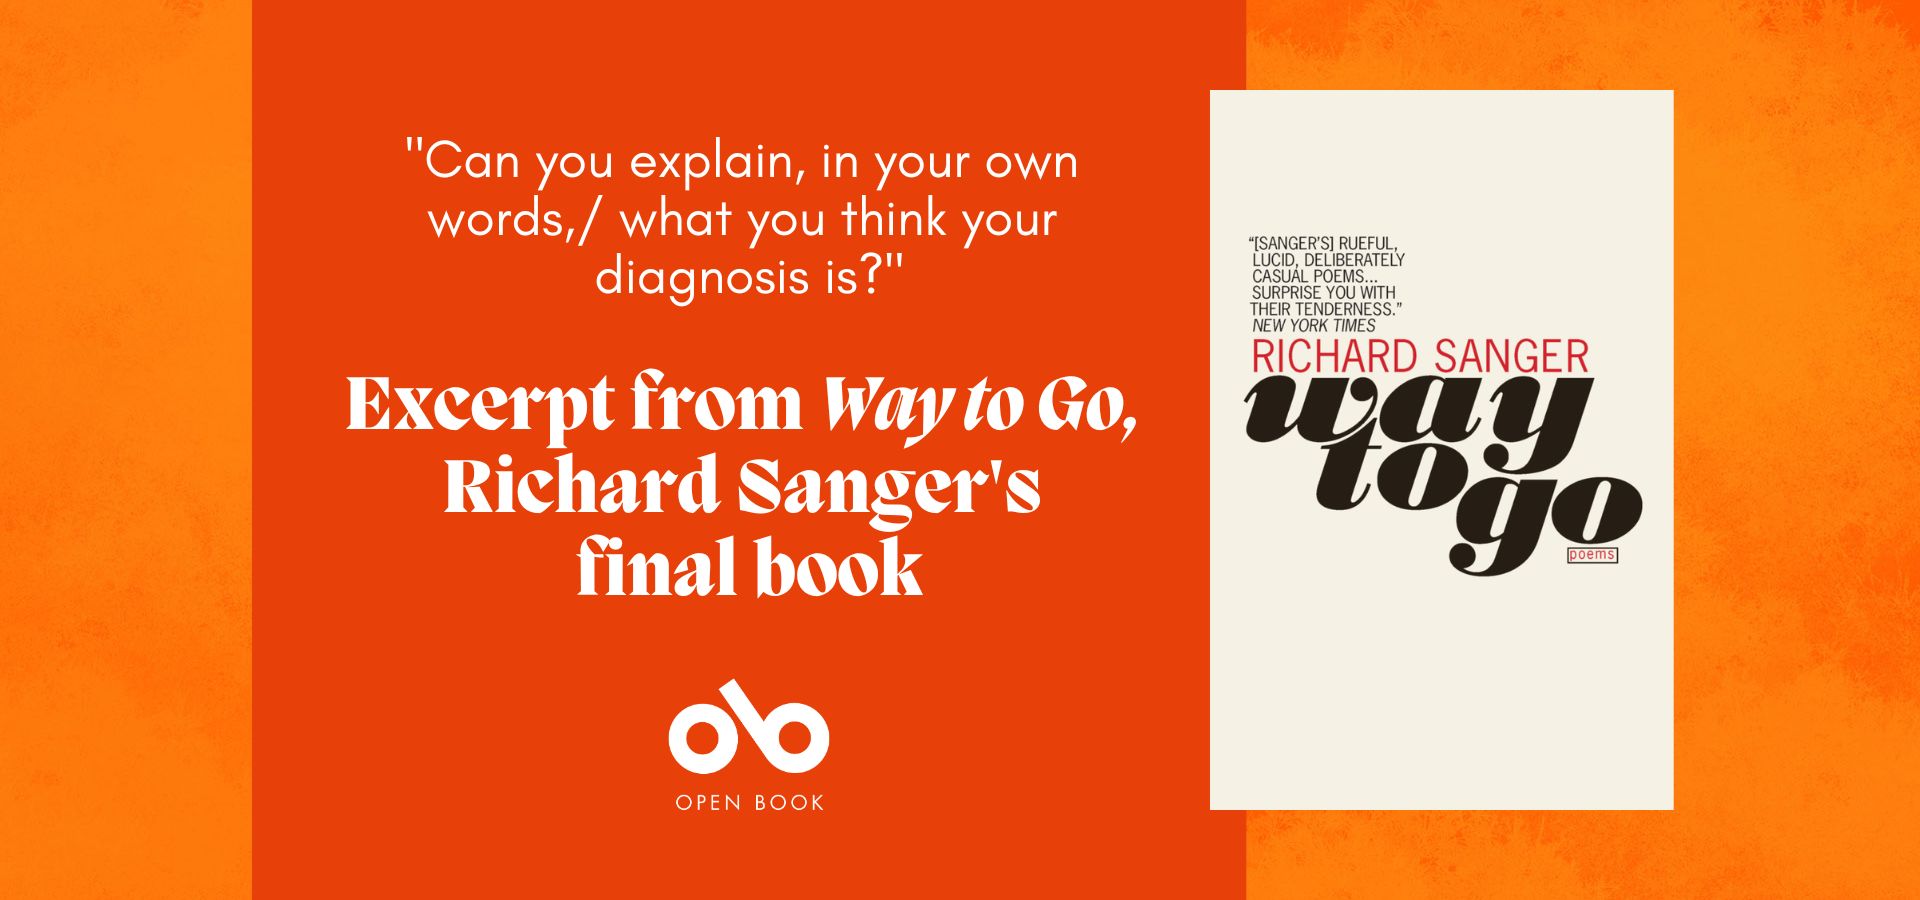 Orange banner image with cover of Richard Sanger's Way to Go and text reading "Can you explain, in your own words, what you think your diagnosis is? Excerpt from Way to Go, Richard Sanger's final book"